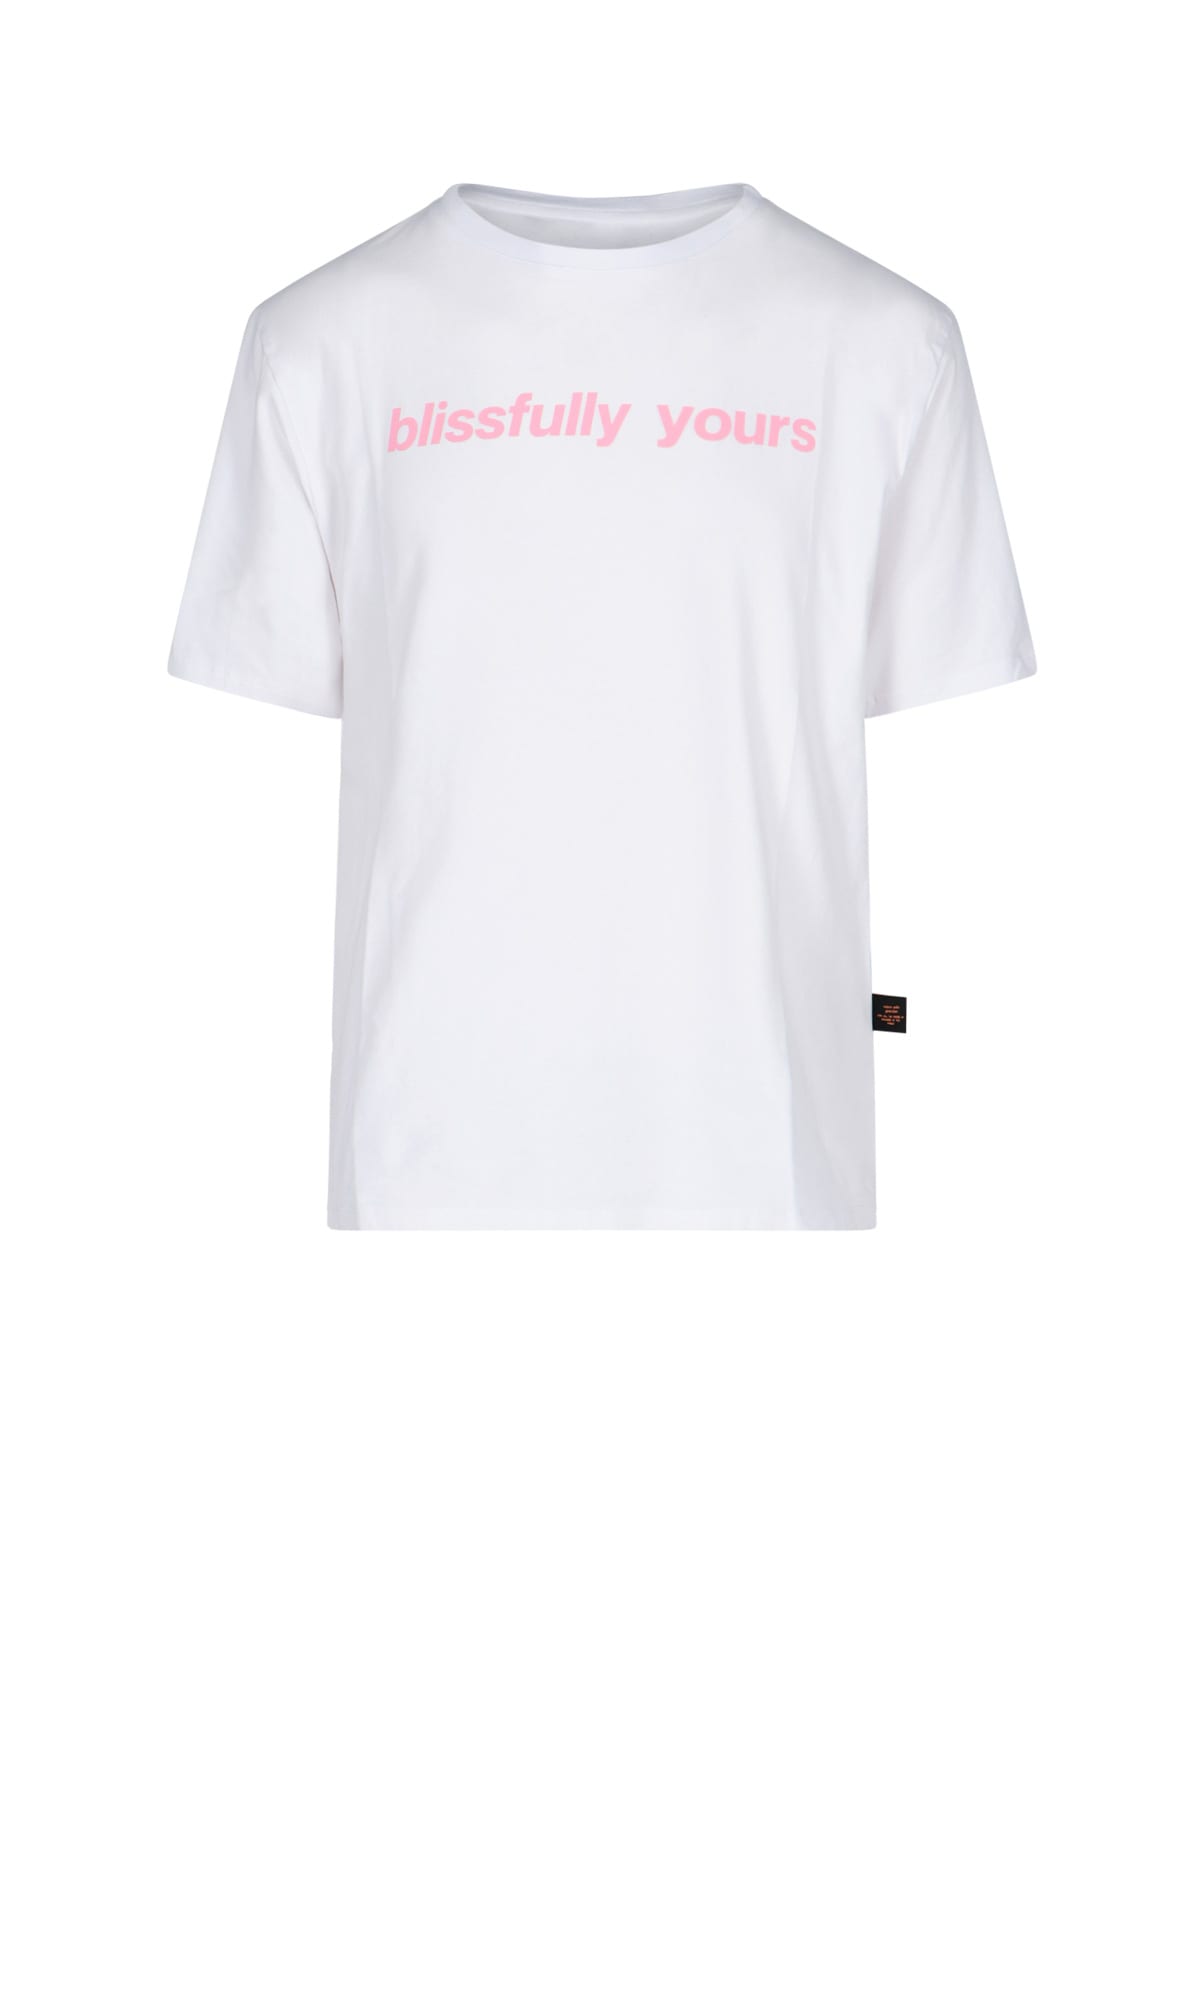 Liberal Youth Ministry Blissfully T-shirt In White | ModeSens